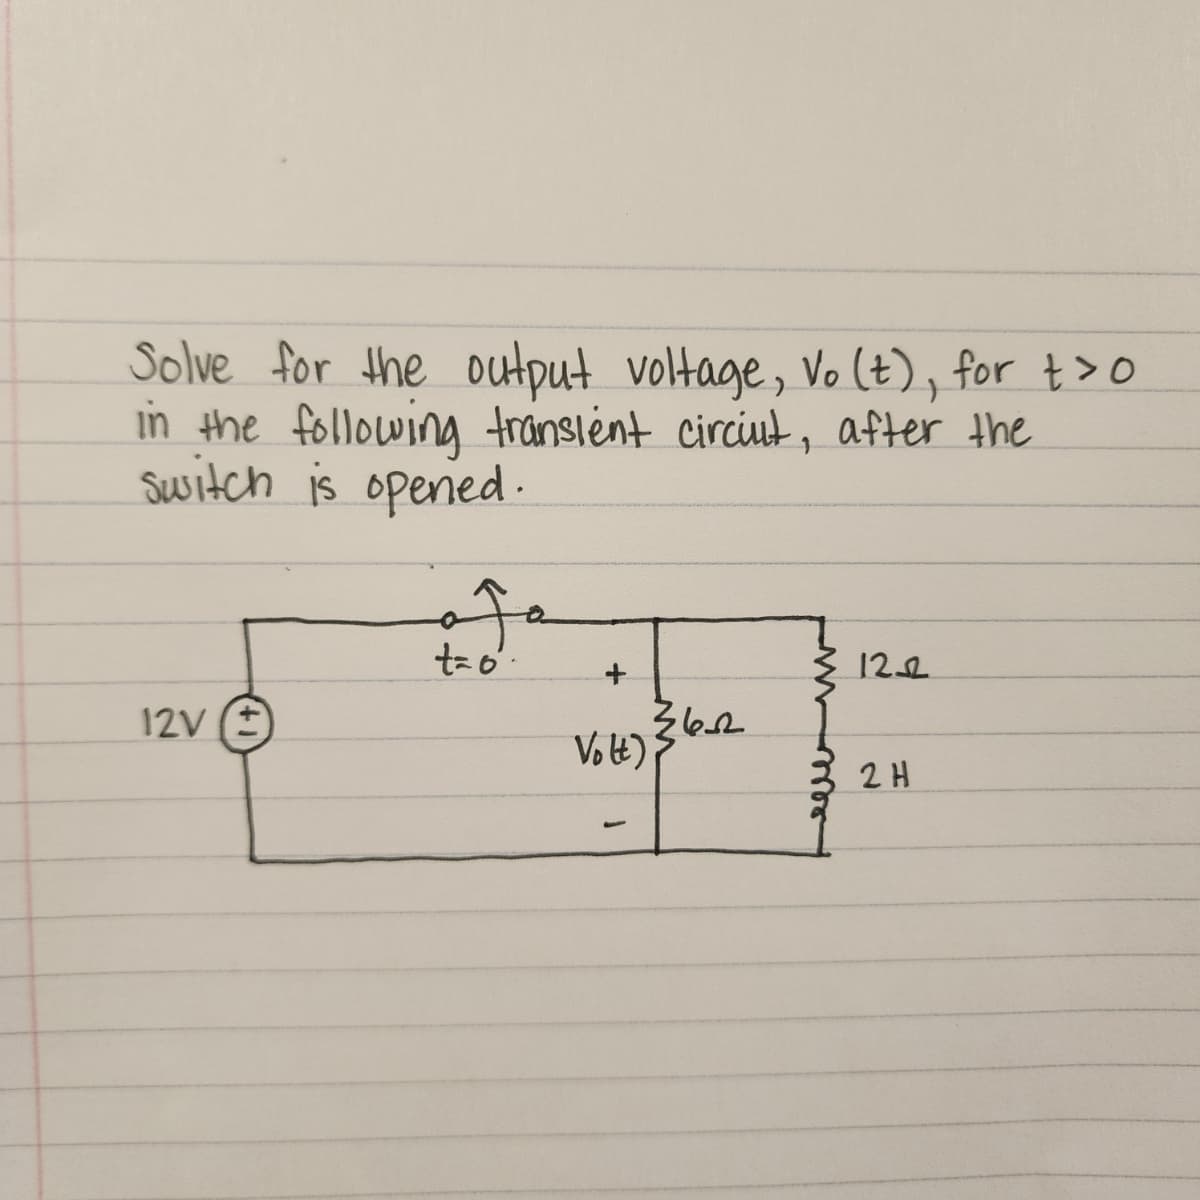 Solve for the output voltage, Vo (t), for t>o
in the following transient circiut, after the
Switch is opened.
12V
t=6
121
Volt) 36-2
2 H